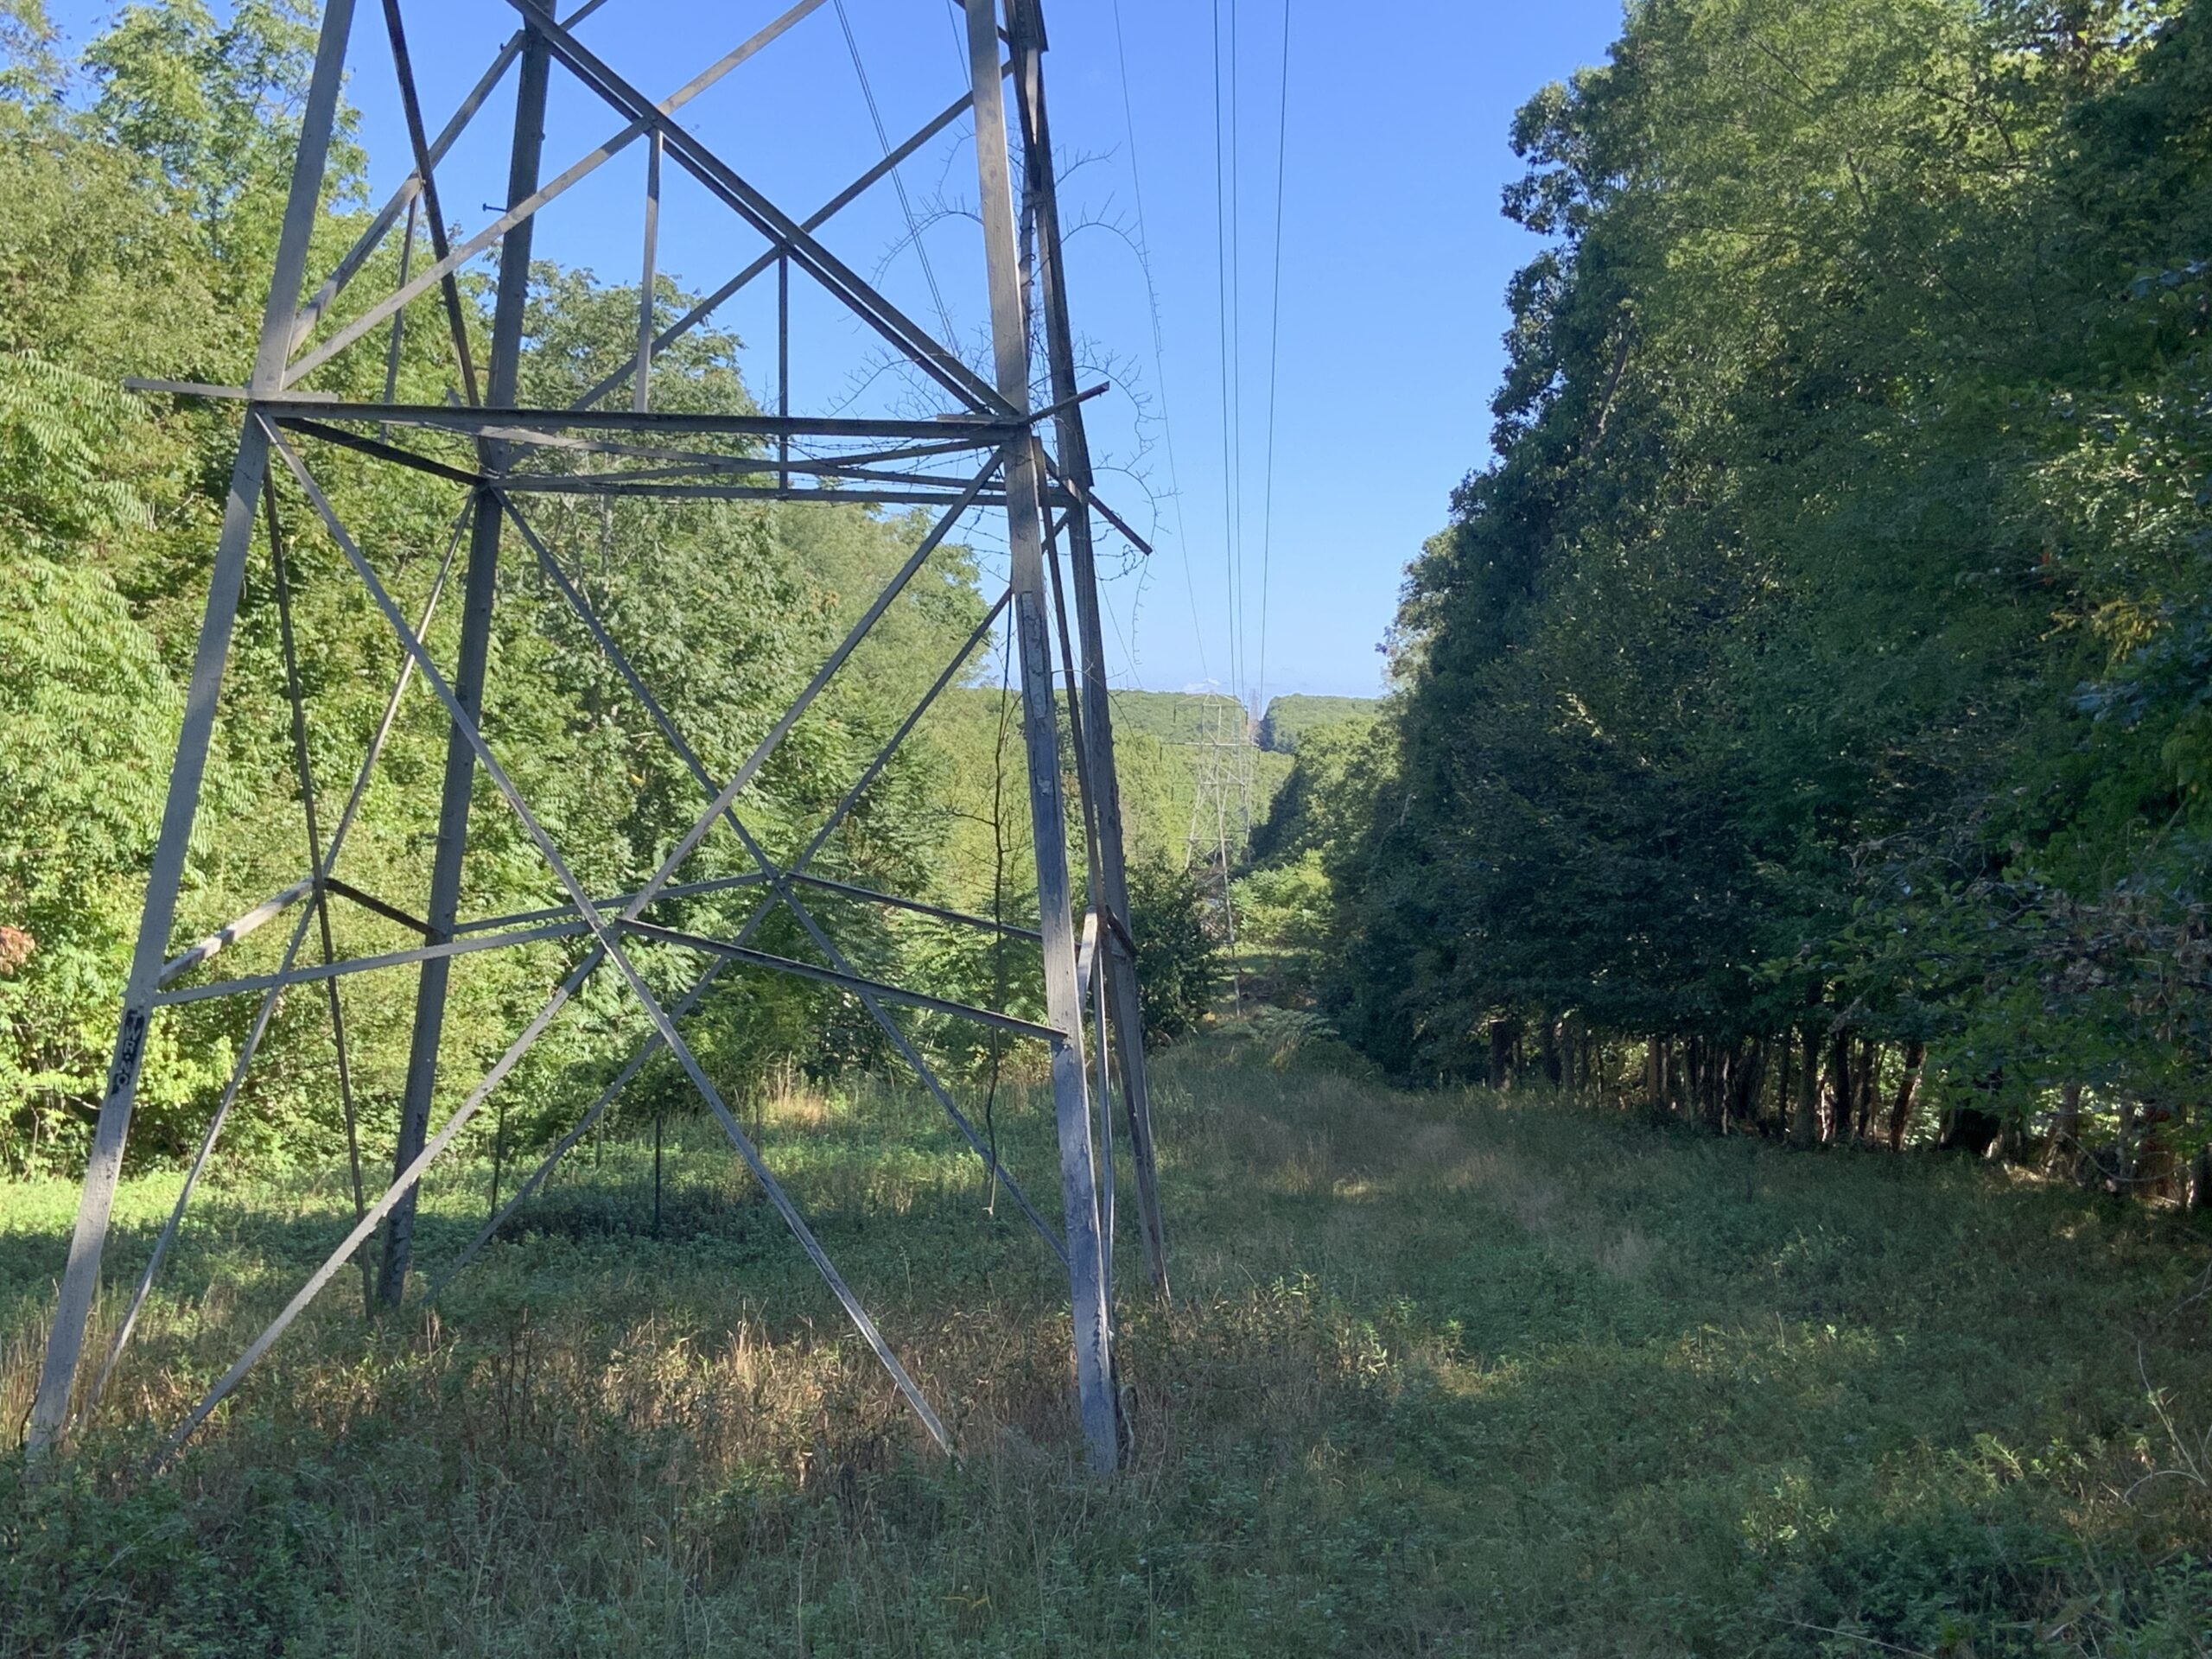 East End environmentalists urged the Long Island Power Authority to abandon plans to run a power cable under its right-of-way through the Long Pond Greenbelt. STEPHEN J. KOTZ